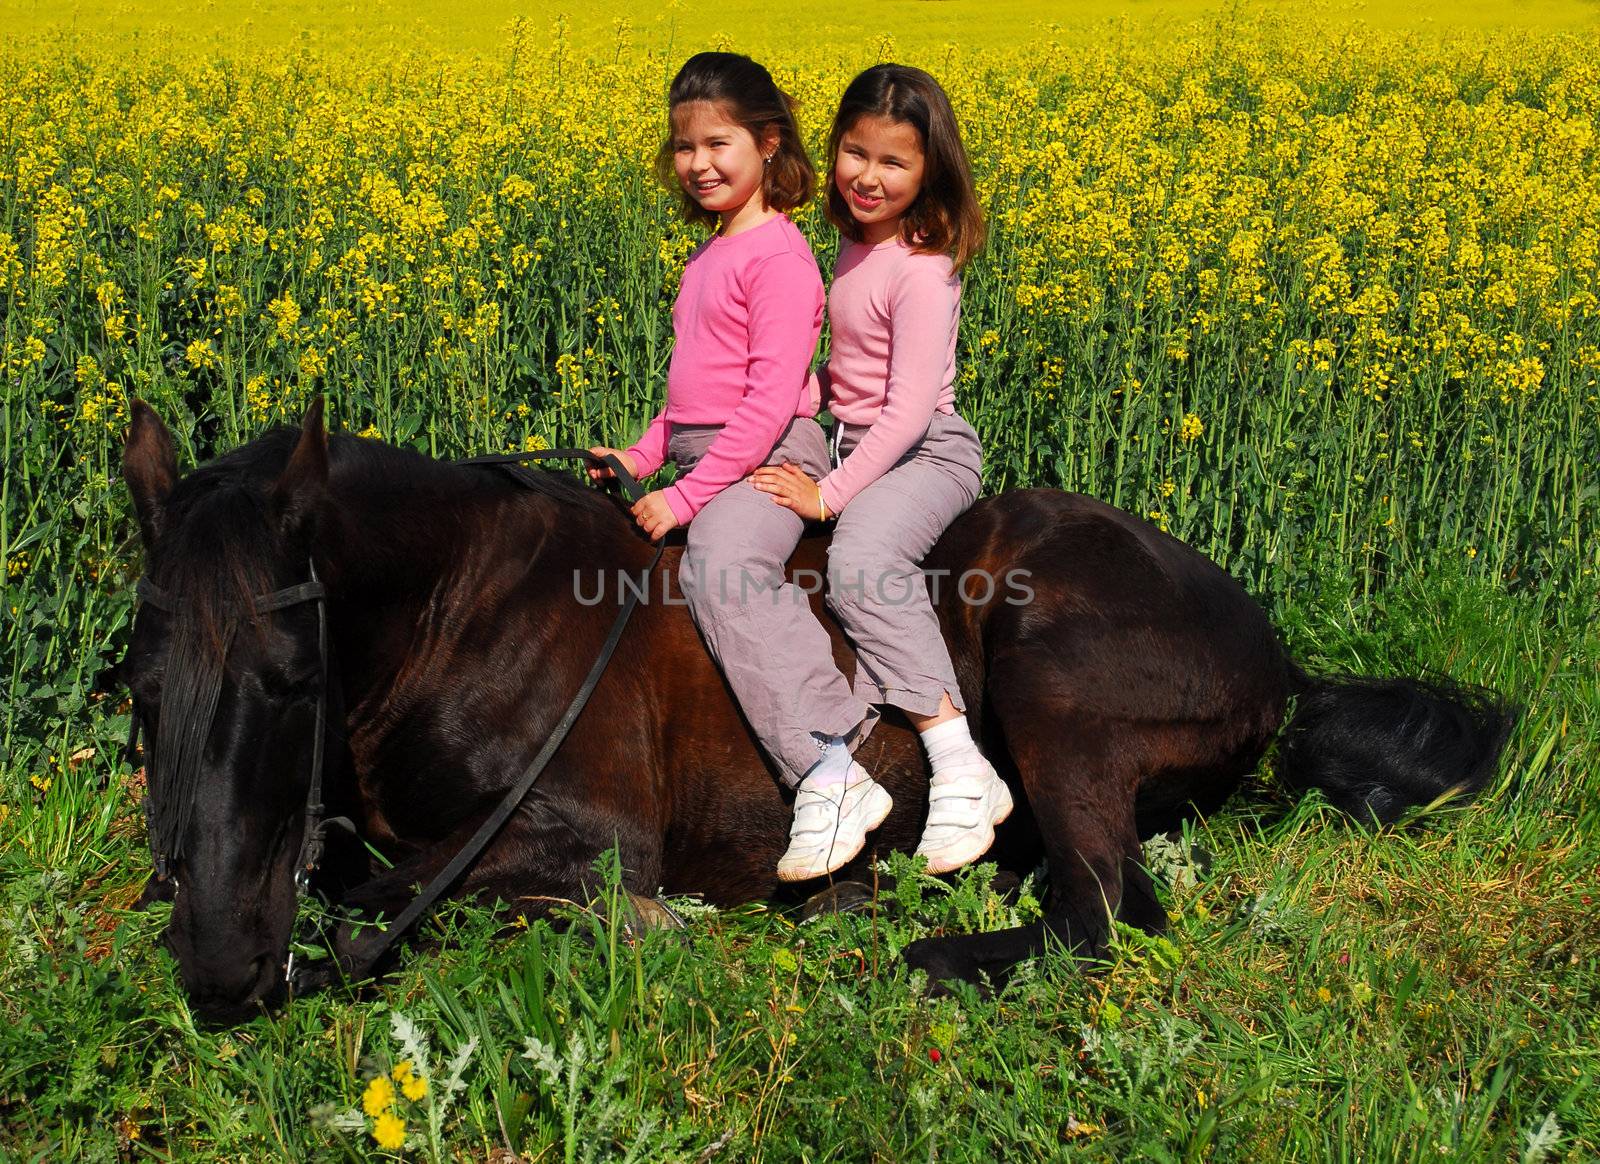 twins sister and black stallion laid down in a field